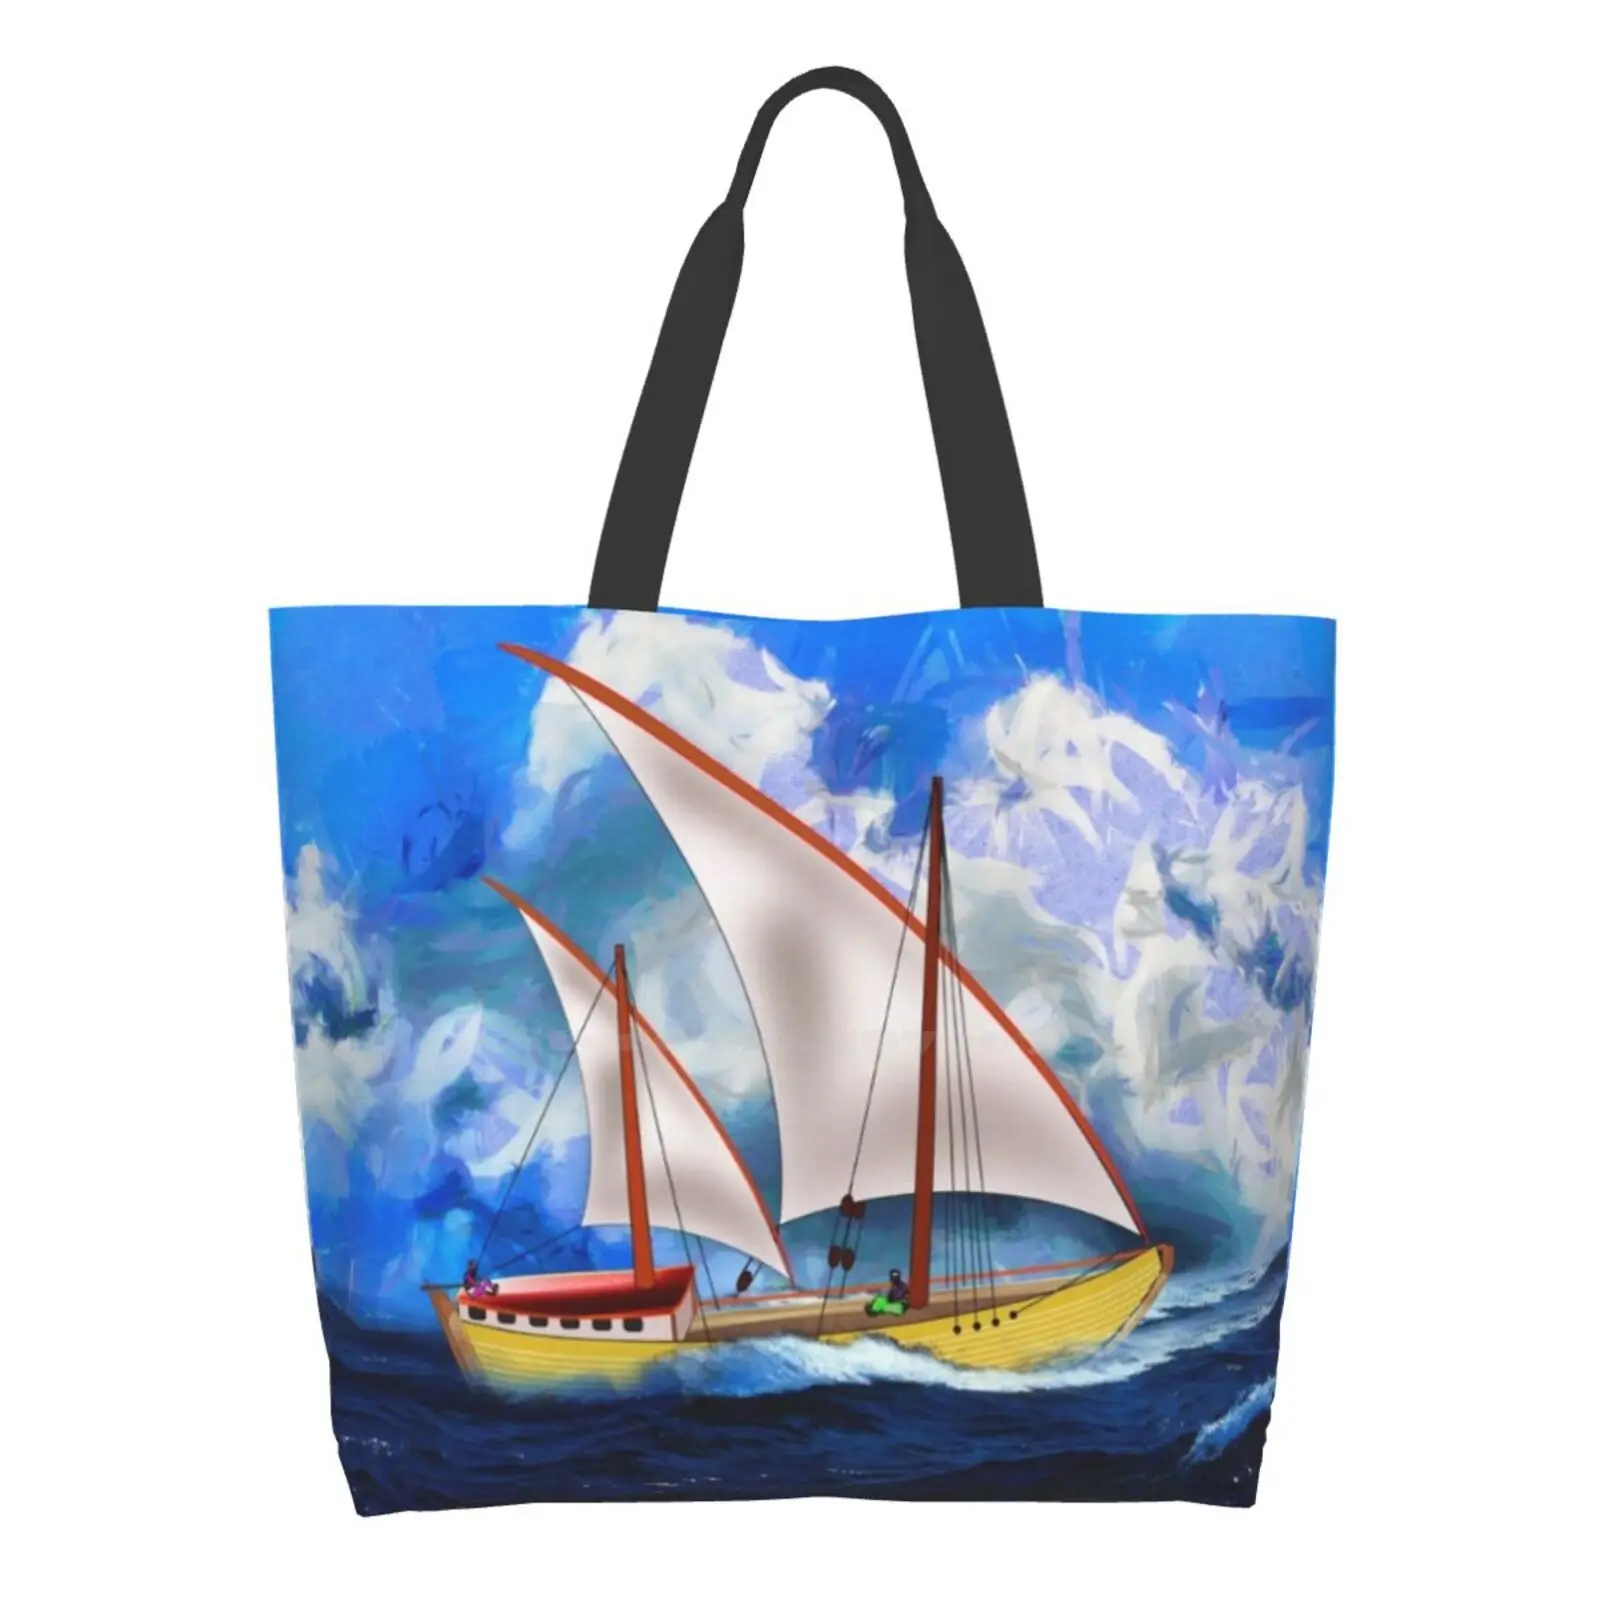 

An Ancient Arab Dhow Speeding Along Shopping Bag Tote Large size Dhow Arab Ancient Vintage Transport Sailing Ship